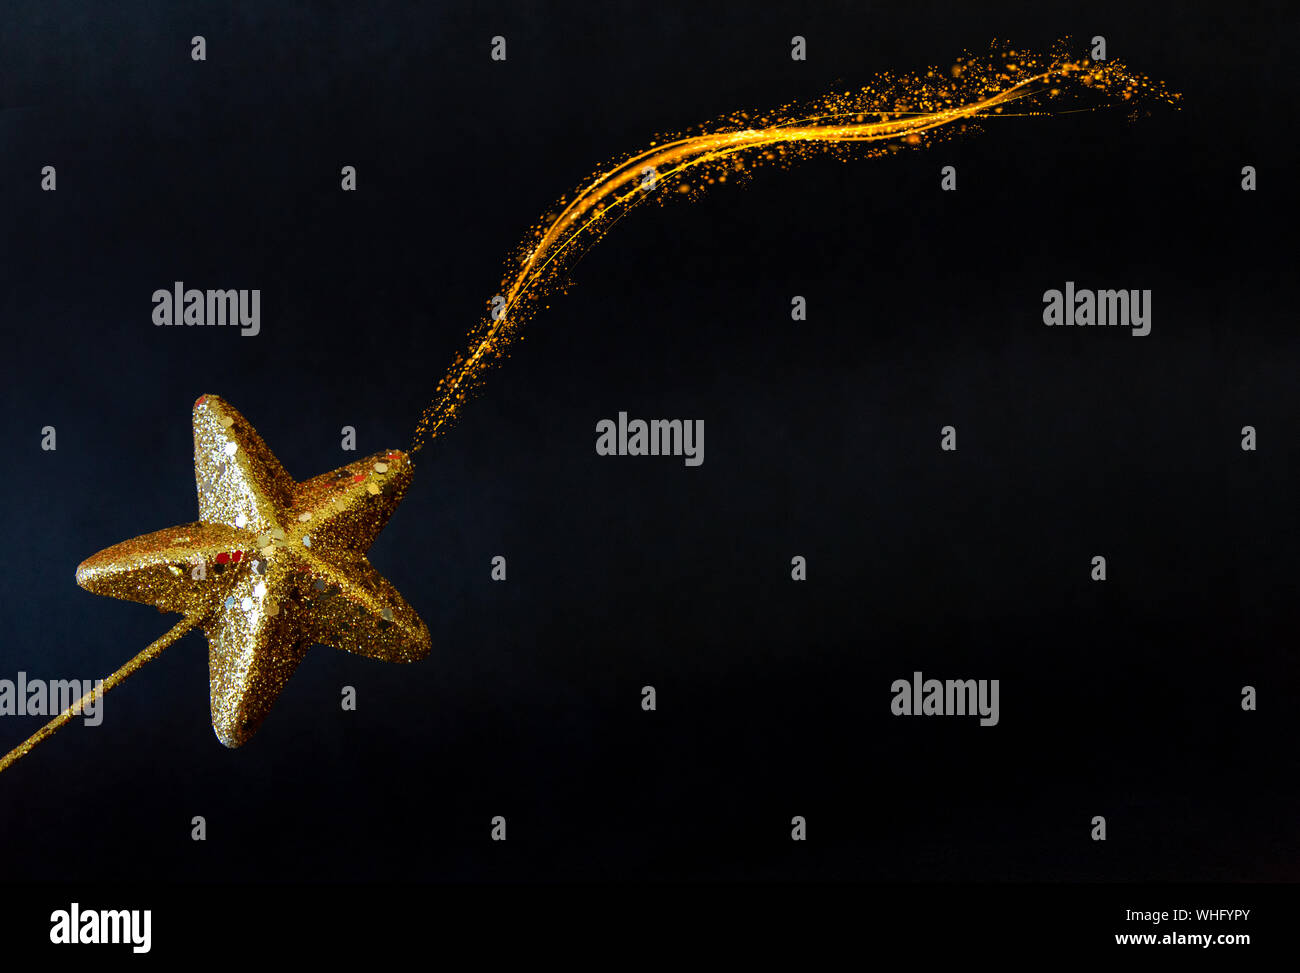 Golden star magiс wand isolated on black background  Stock Photo